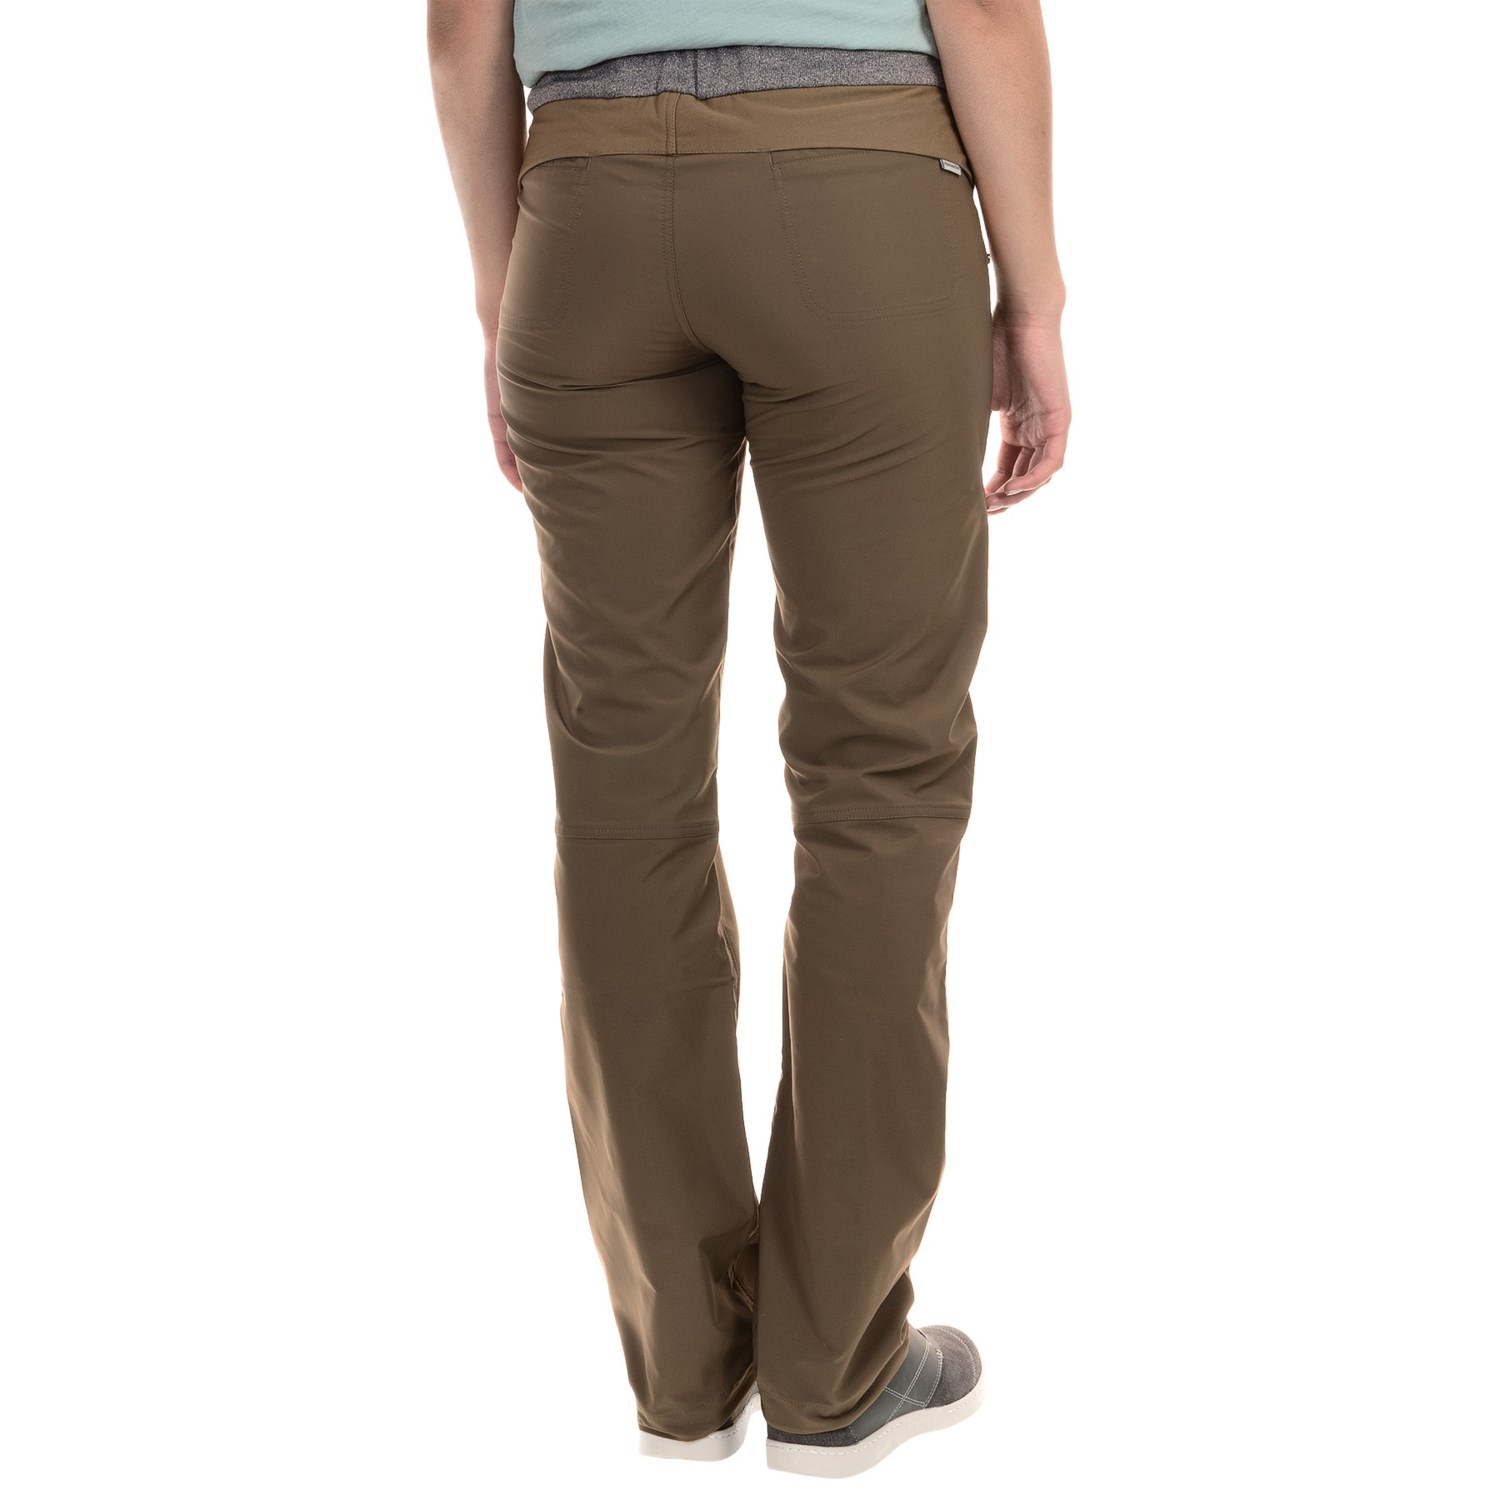 Avalanche Wear Ace Pants (For Women) - Save 81%